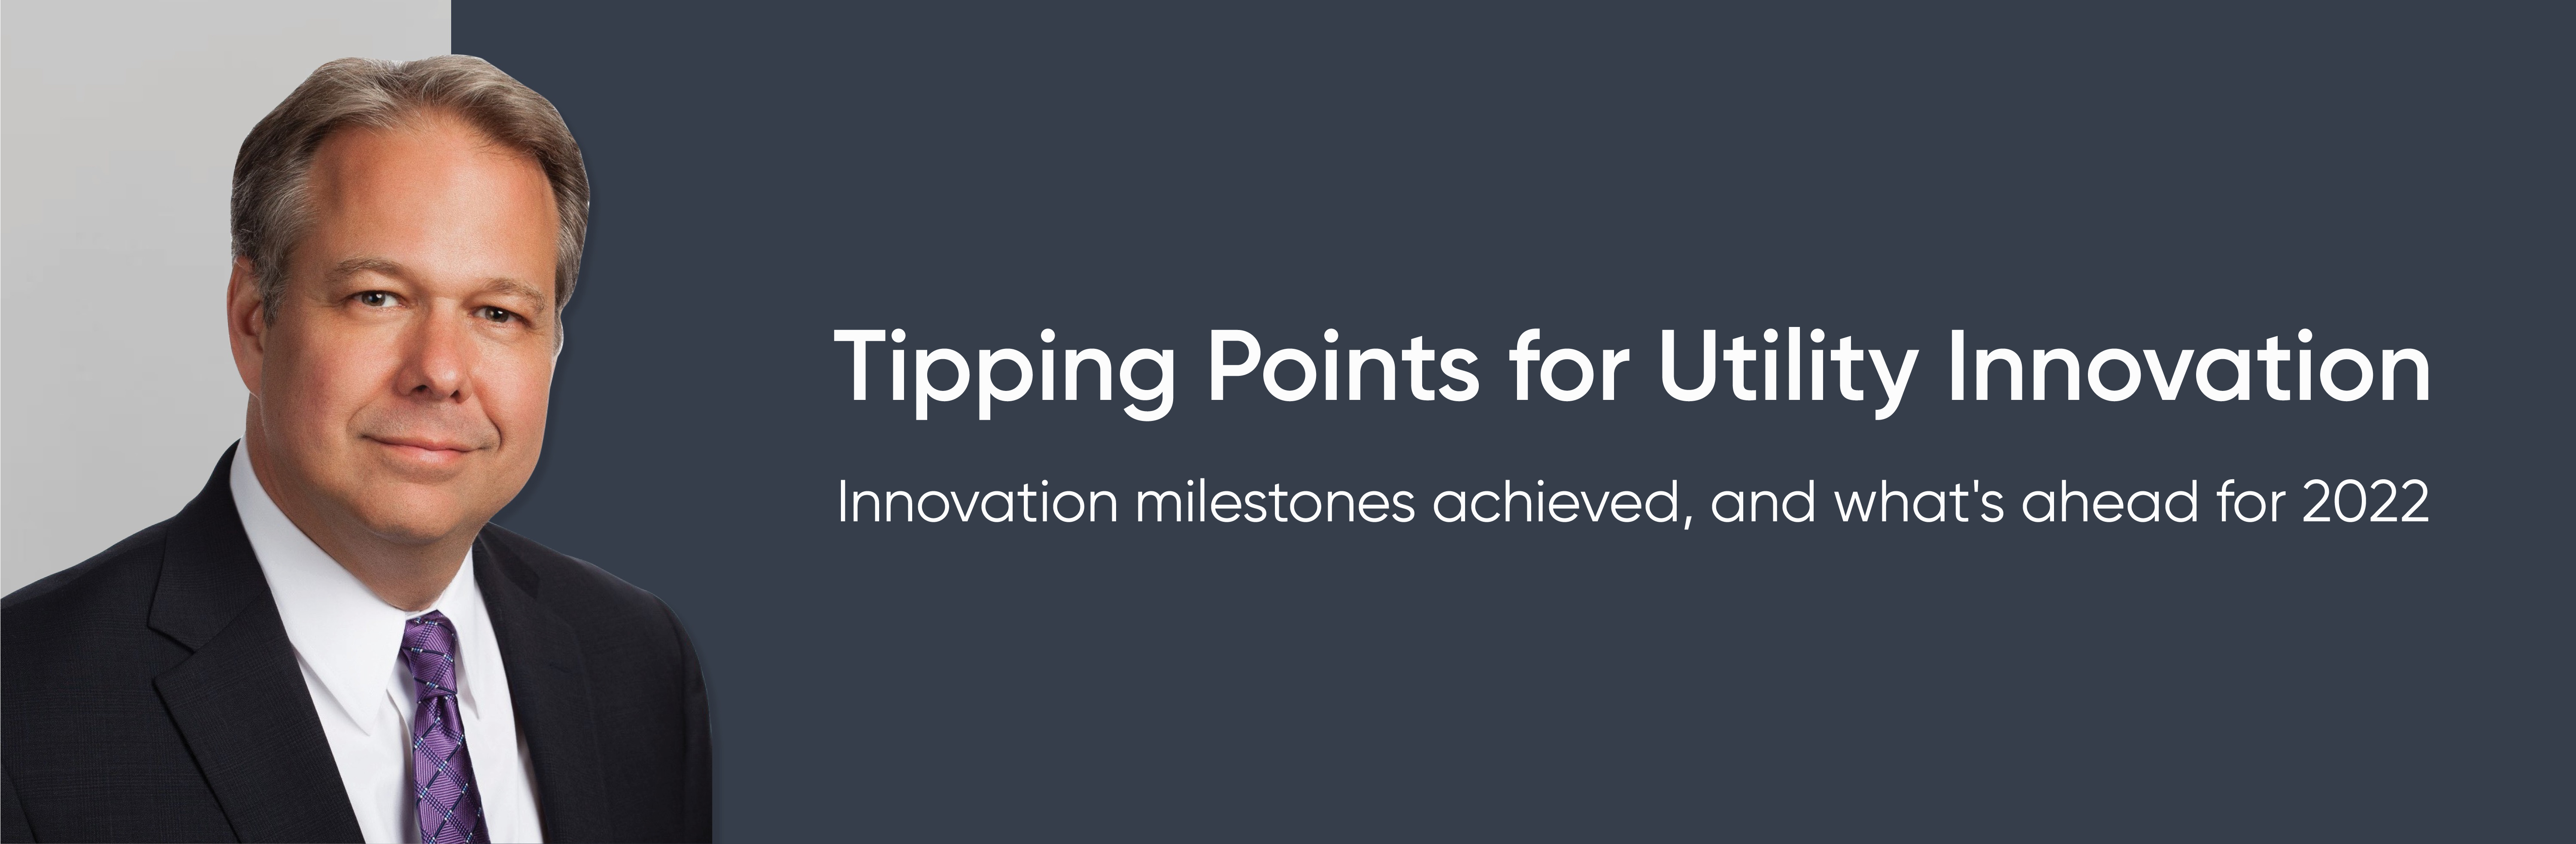 Tipping Points for Utility Innovation